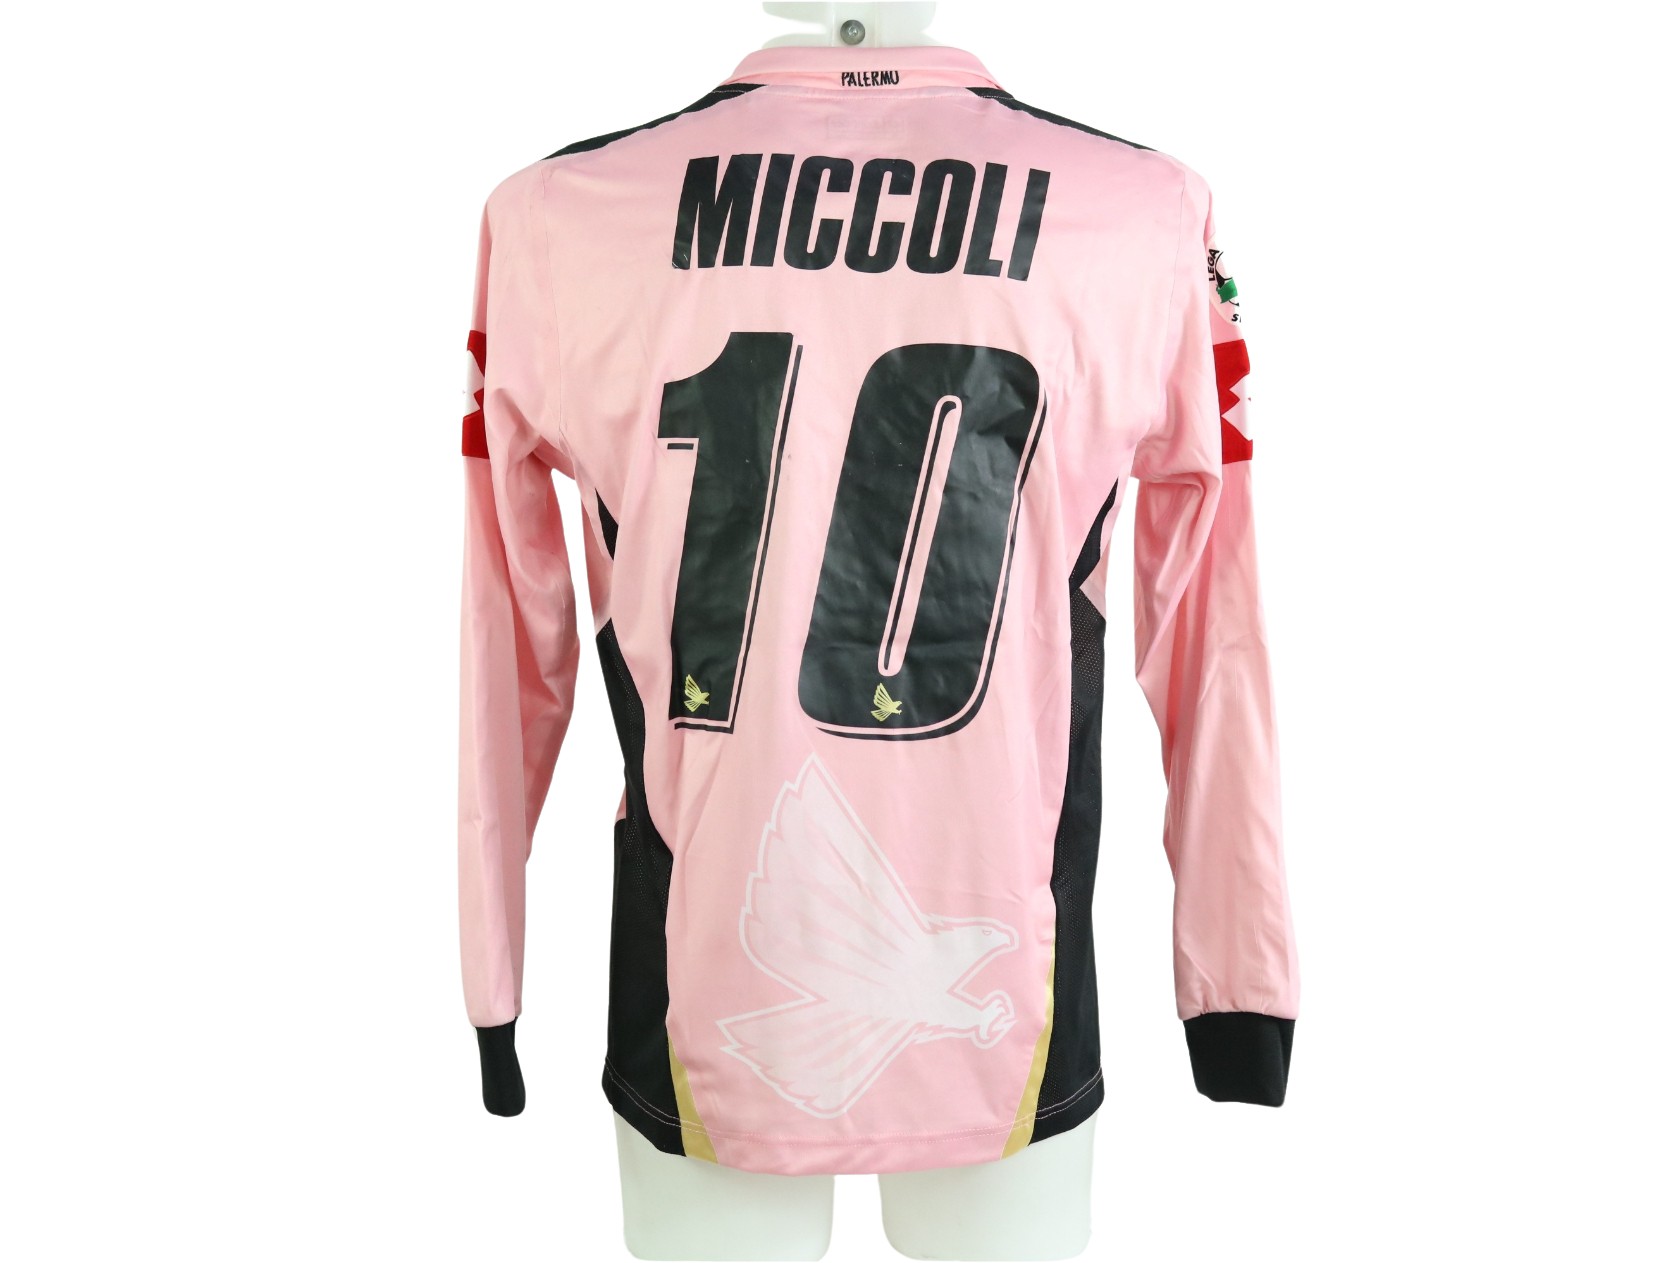 2007/08 Palermo Away Football Shirt / Old Lotto Sicily Soccer Jersey